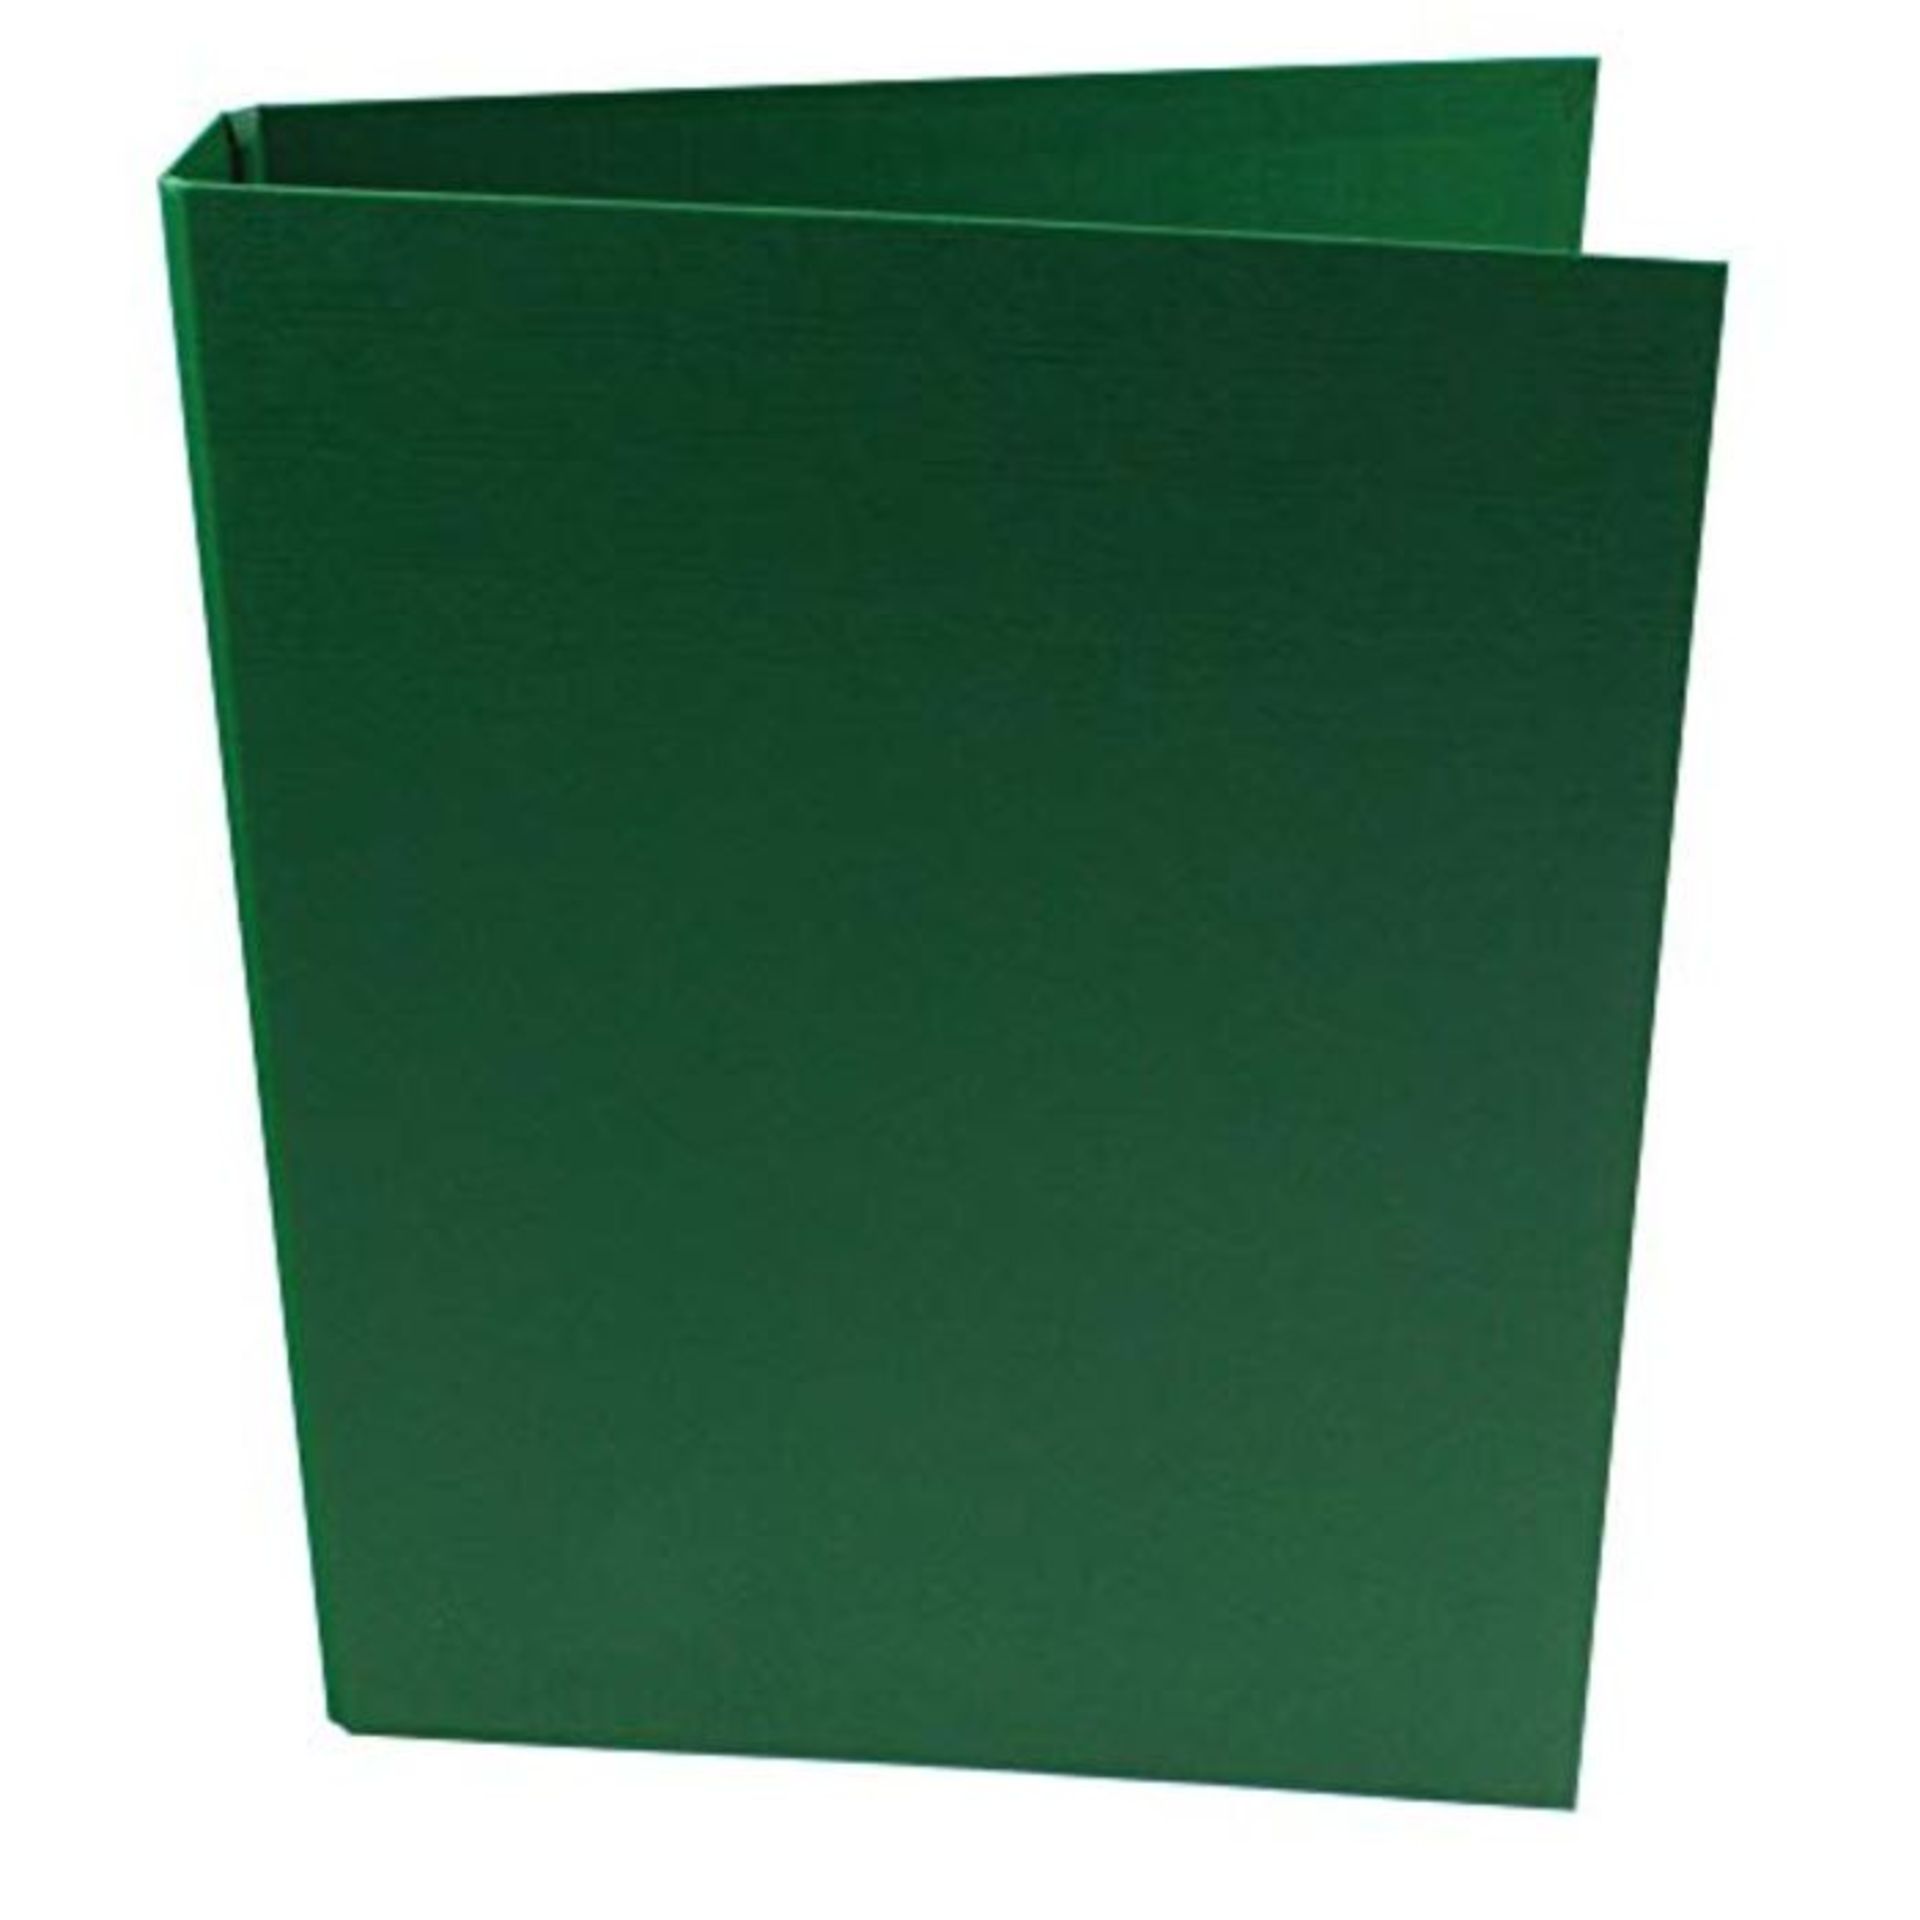 Q-Connect 2 Ring Polypropylene A4 Binder, 25 mm KF02004 - Green, Pack of 10 - Image 3 of 4